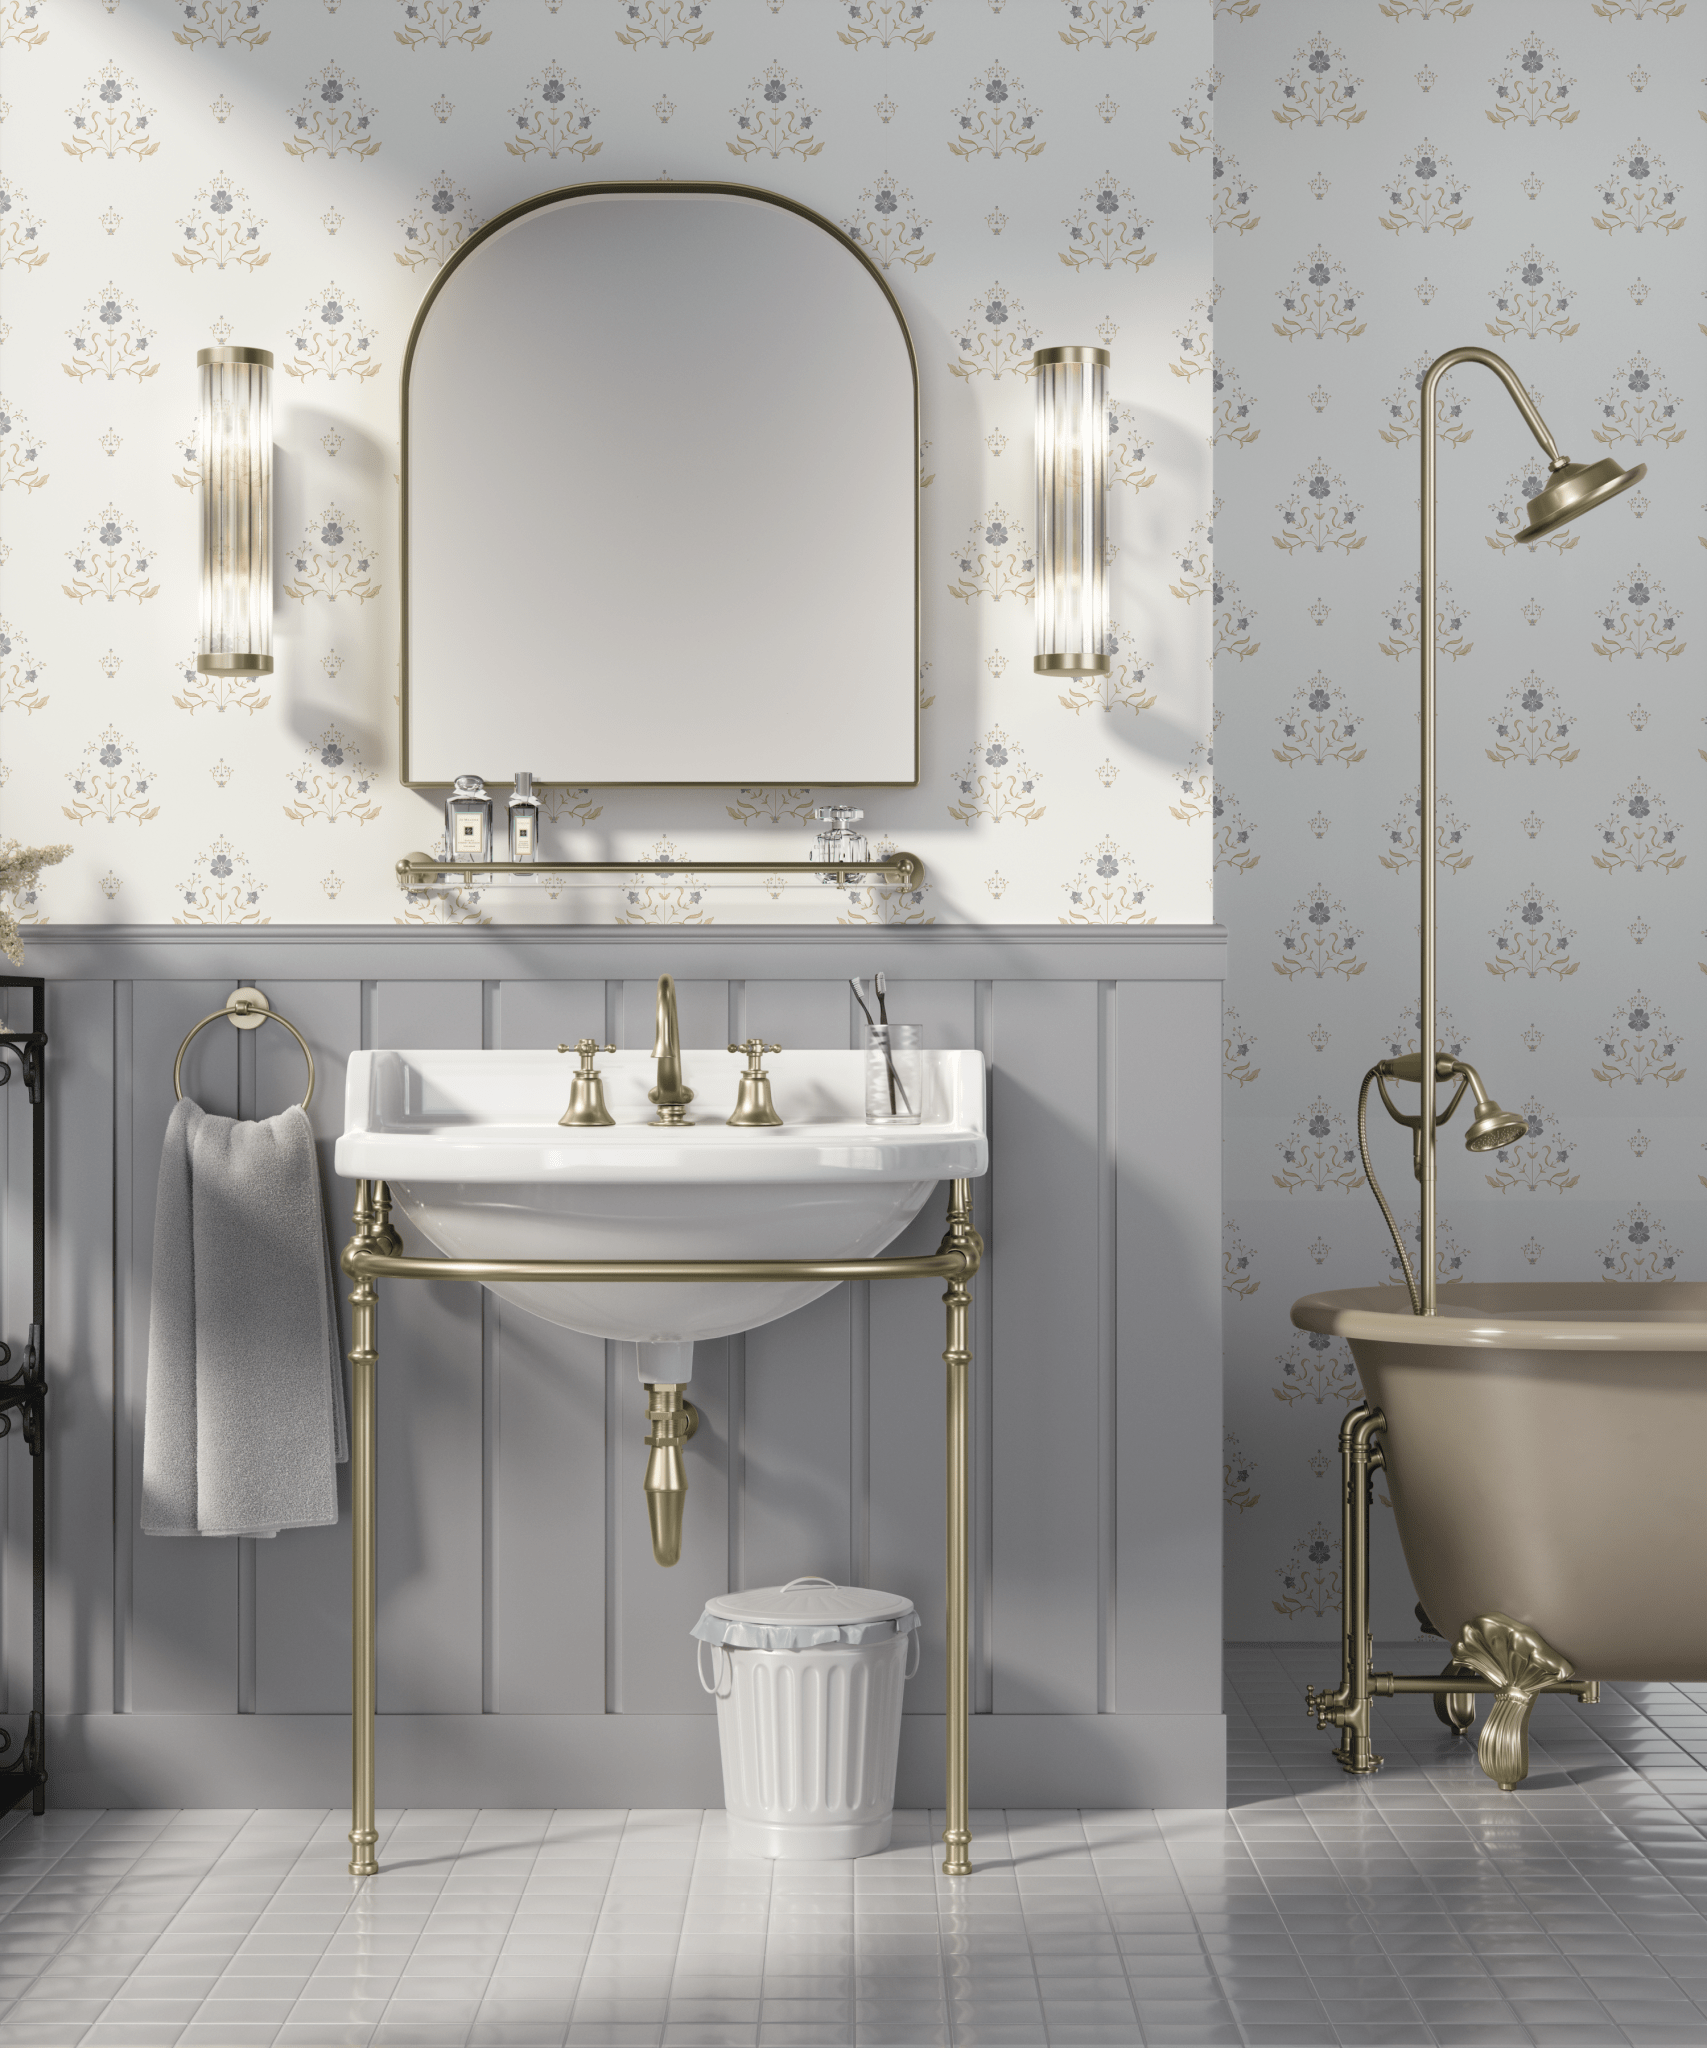 Traditional bathroom with regal floral wallpaper in blue and gold patterns, featuring a vintage sink with brass fixtures, a matching bathtub, and elegant lighting